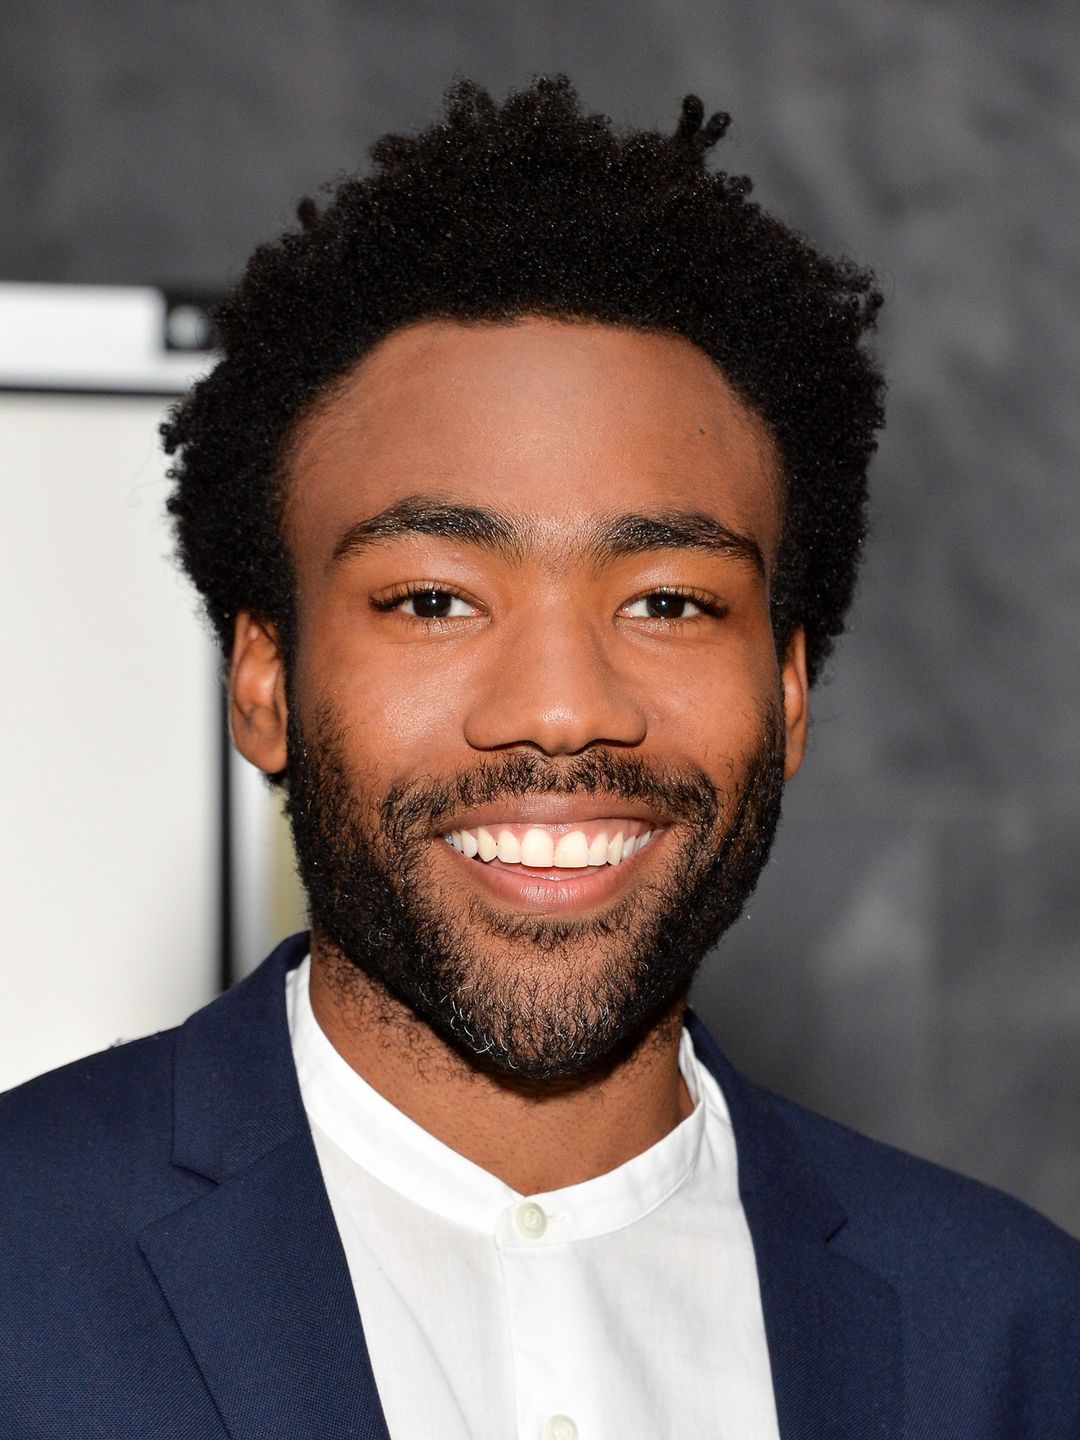 Donald Glover appearance